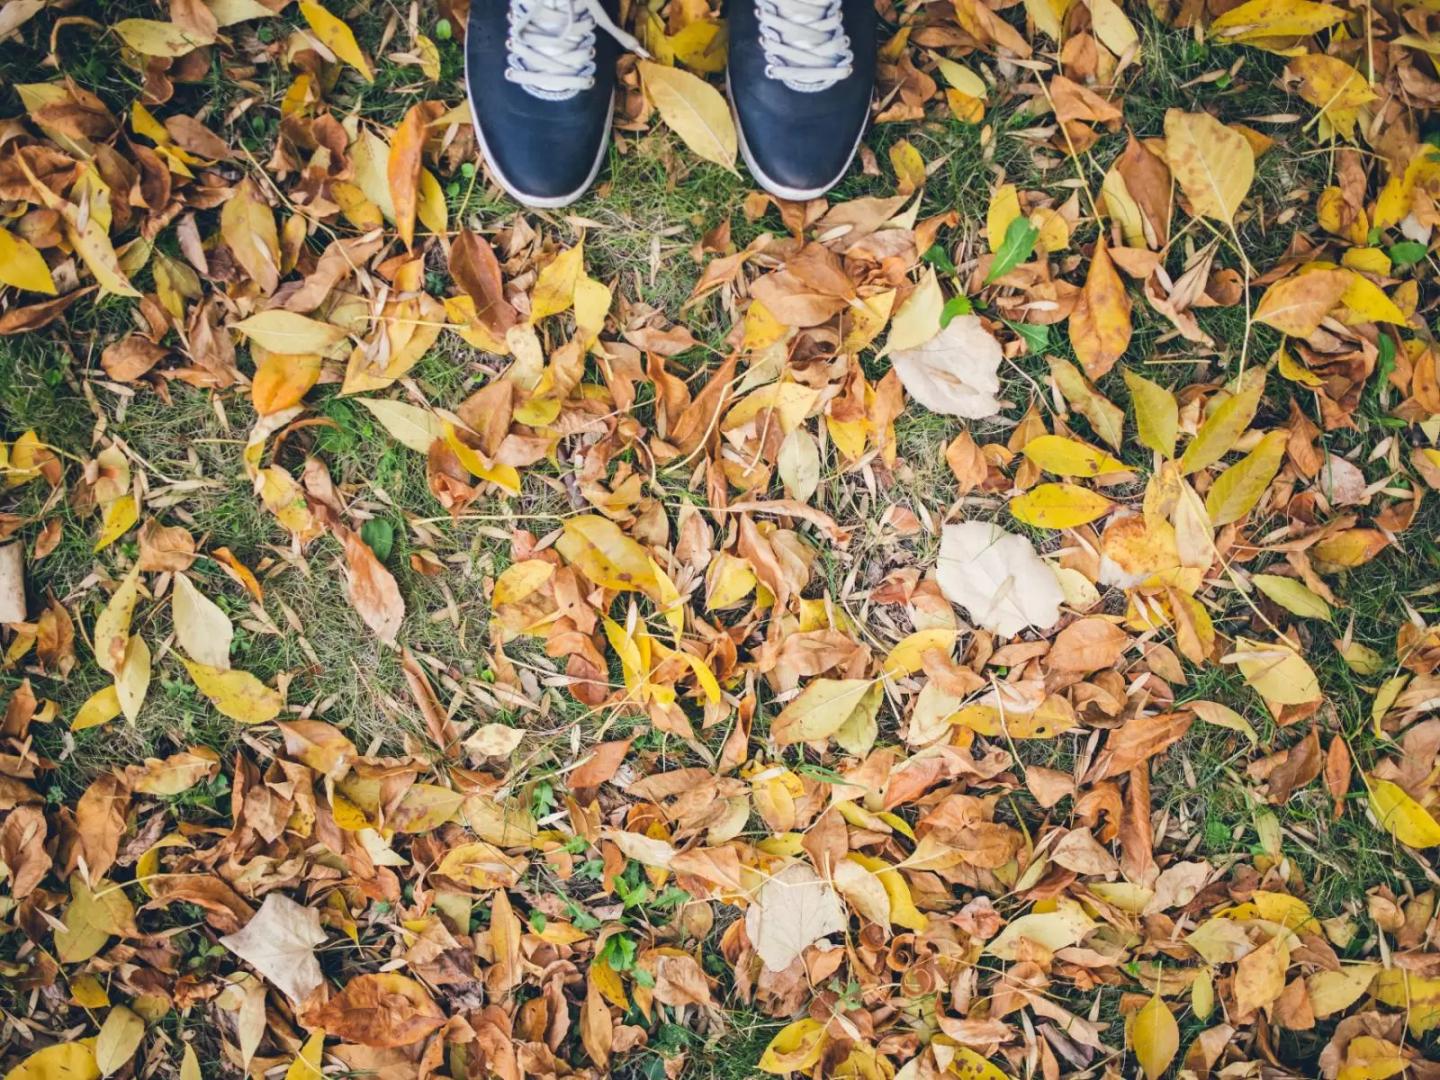 A pair of shoes at the edge of a bunch of leaves on the ground